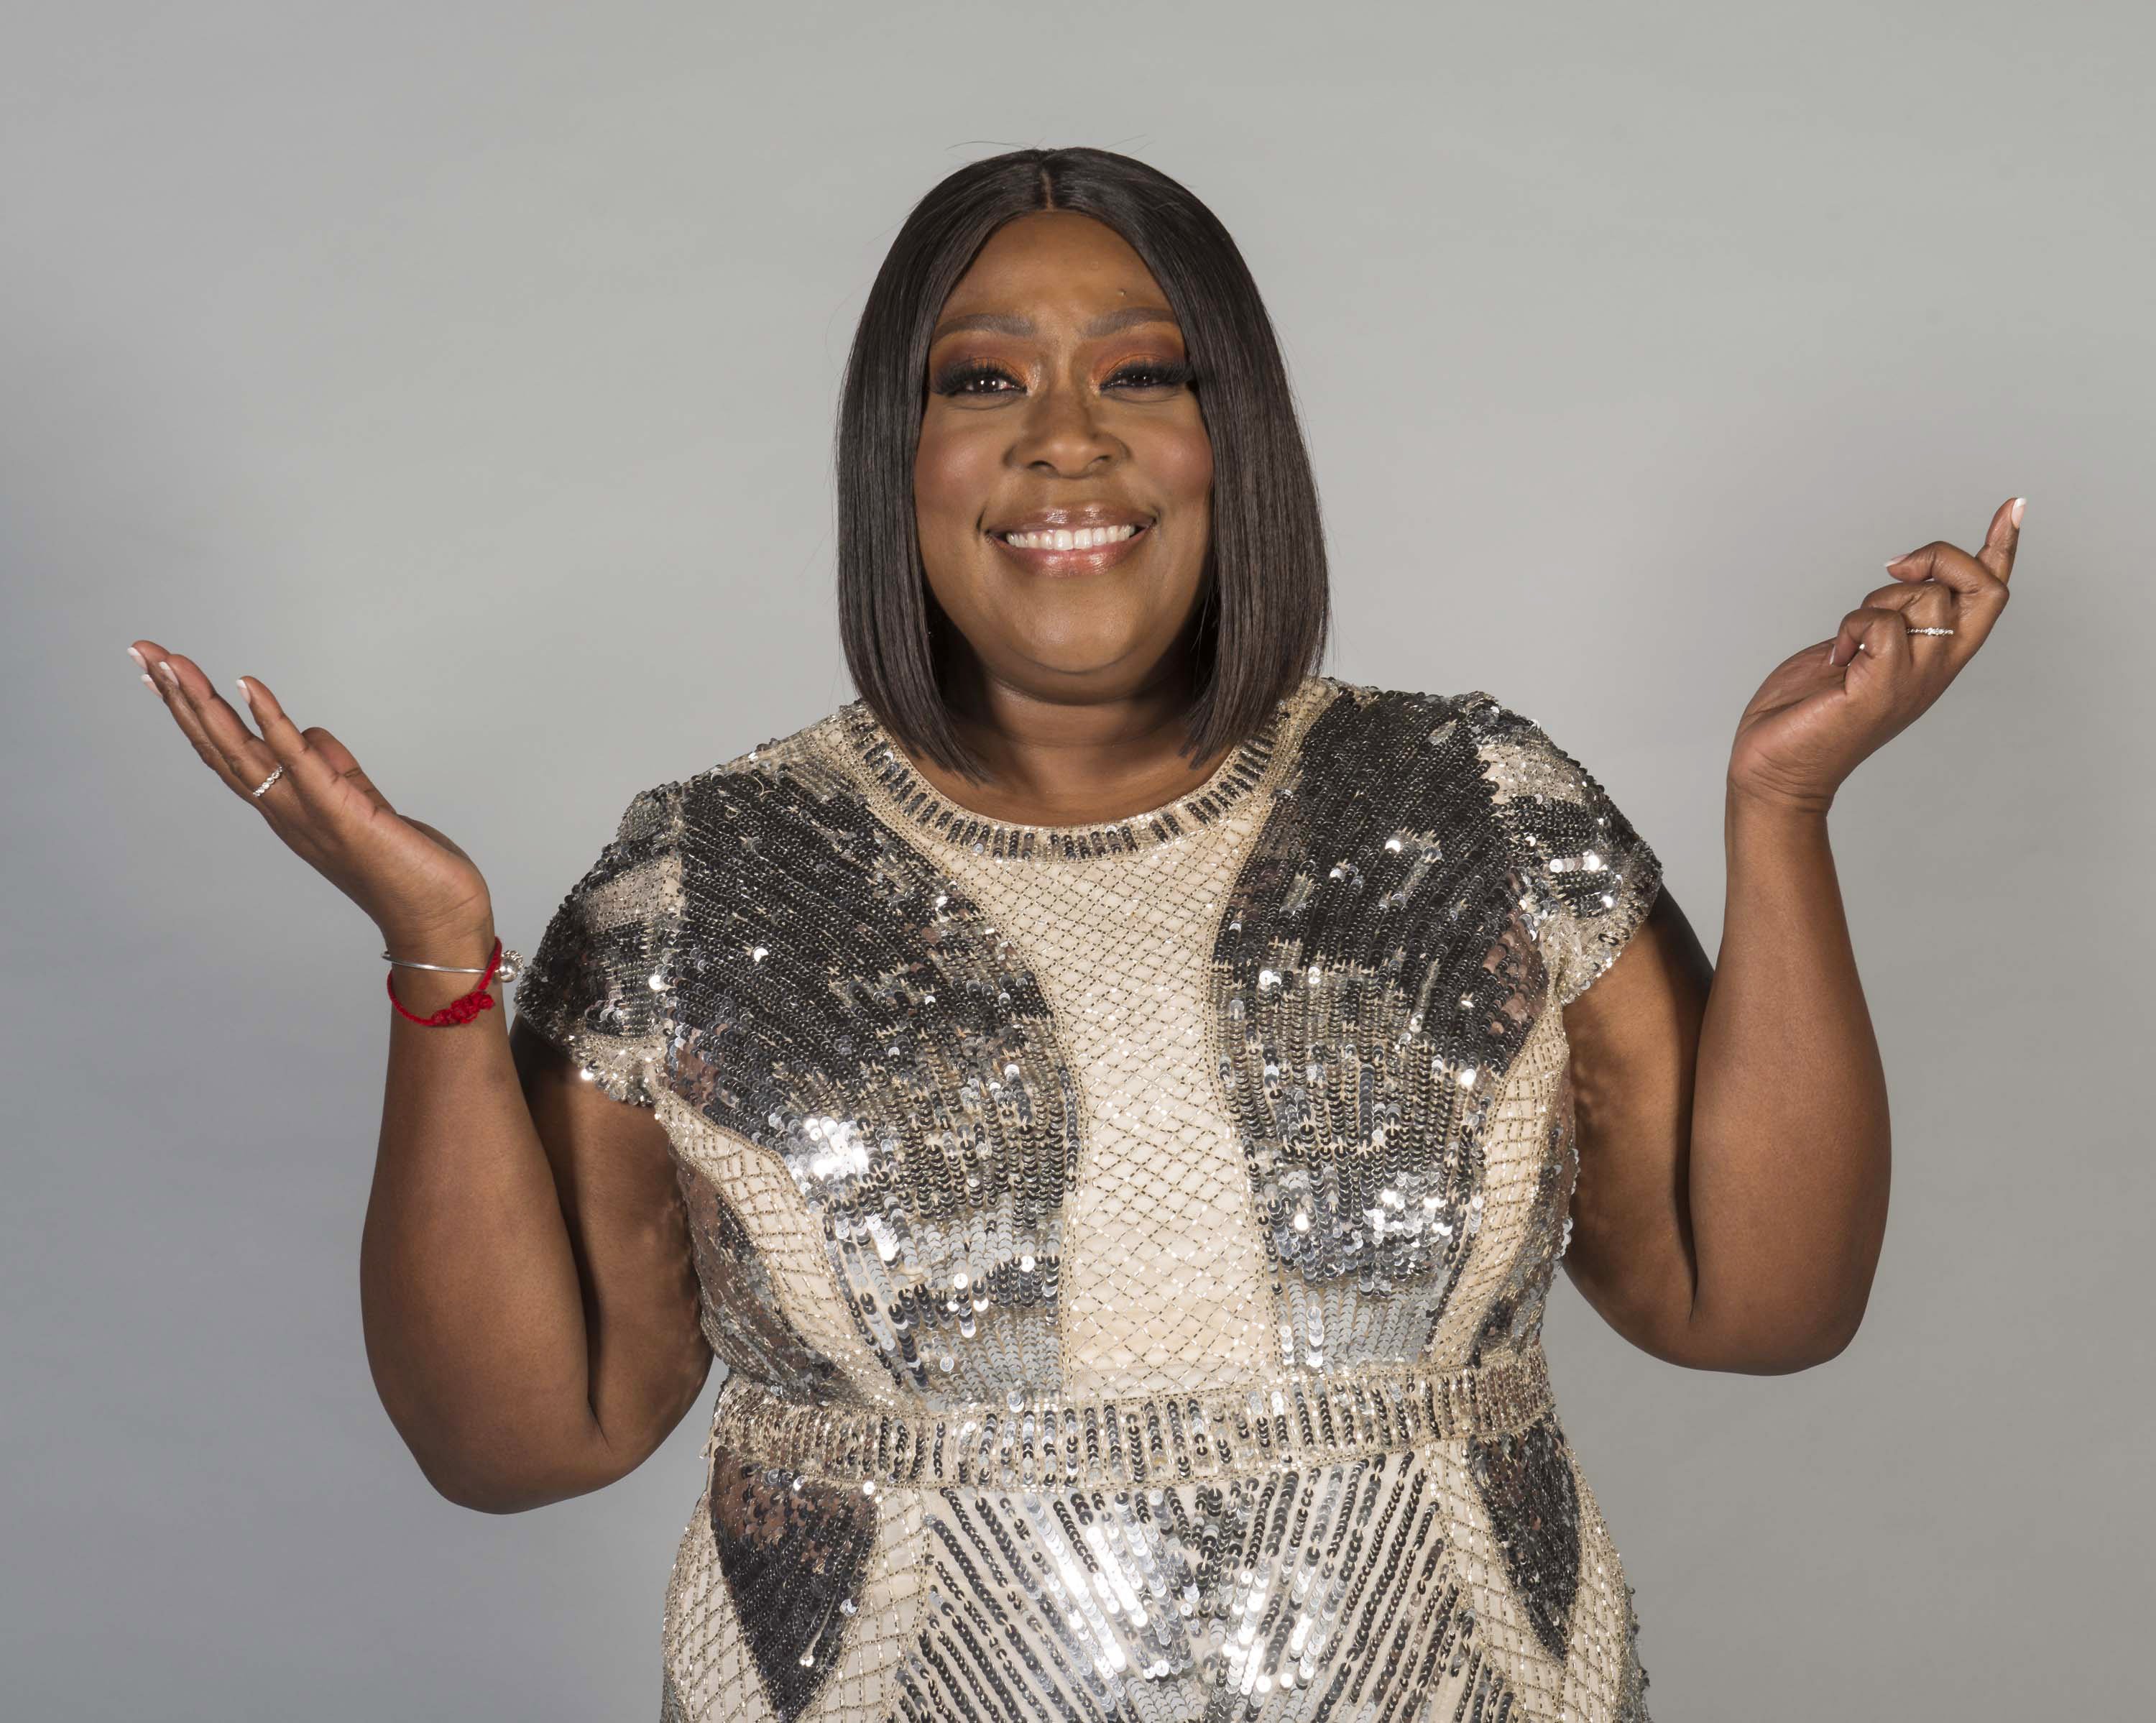 Loni Love poses for portrait at 45th Daytime Emmy Awards - Portraits by The Artists Project on April 29, 2018. | Photo: GettyImages